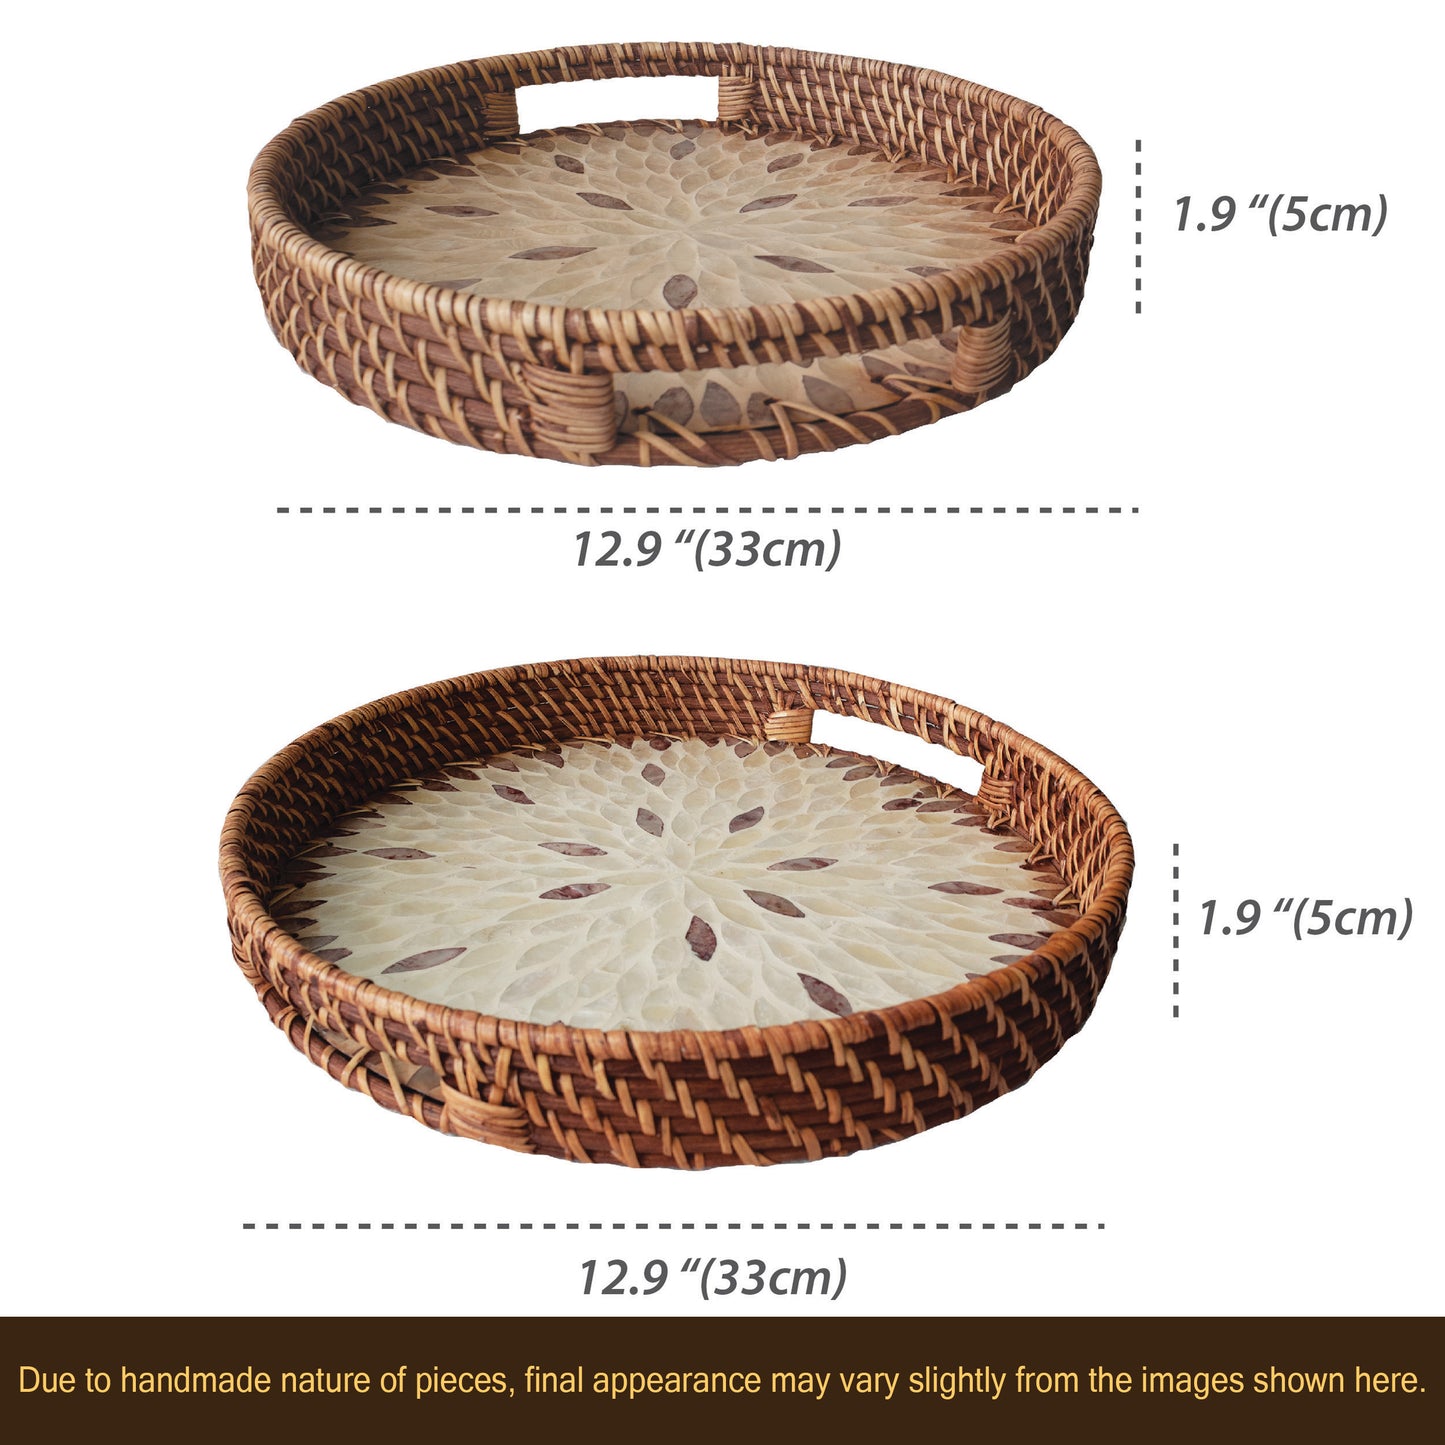 Set 2 Pack Round Rattan Wicker Tray with Mother of Pearl Inlay Wooden Base and Insert Handle for Home Decor and Display